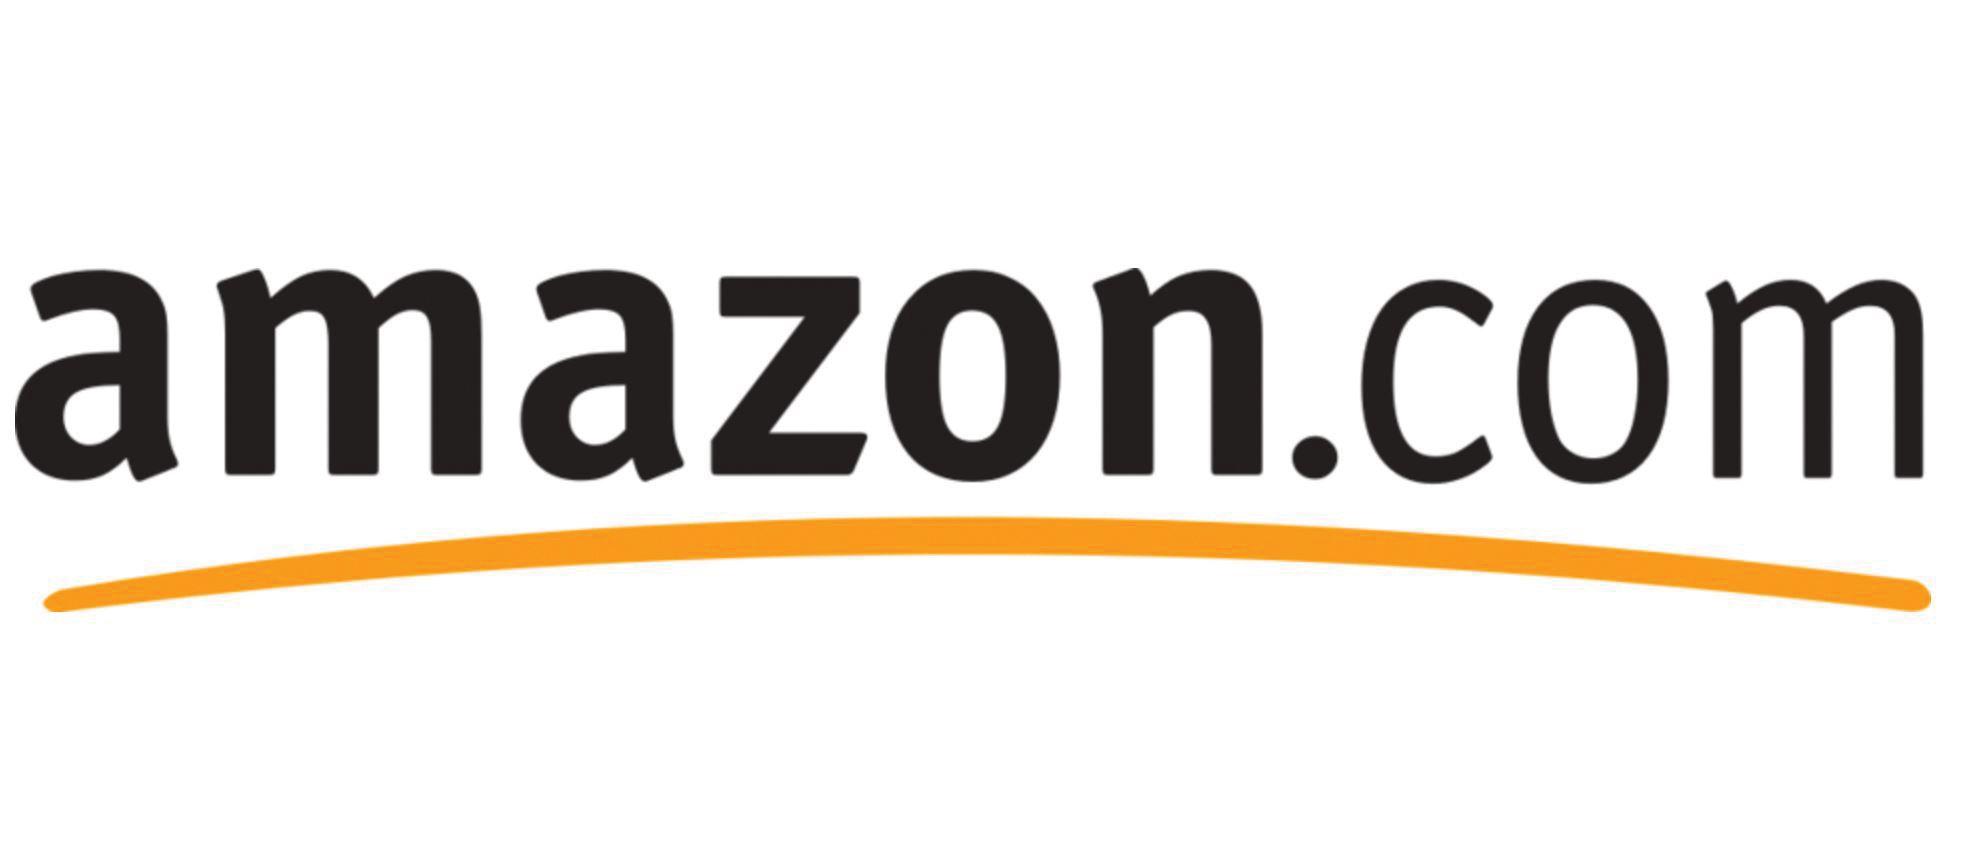 Amazon Old Logo - Print a Mark: The Good, the Bad and the Ugly of Recent Logo